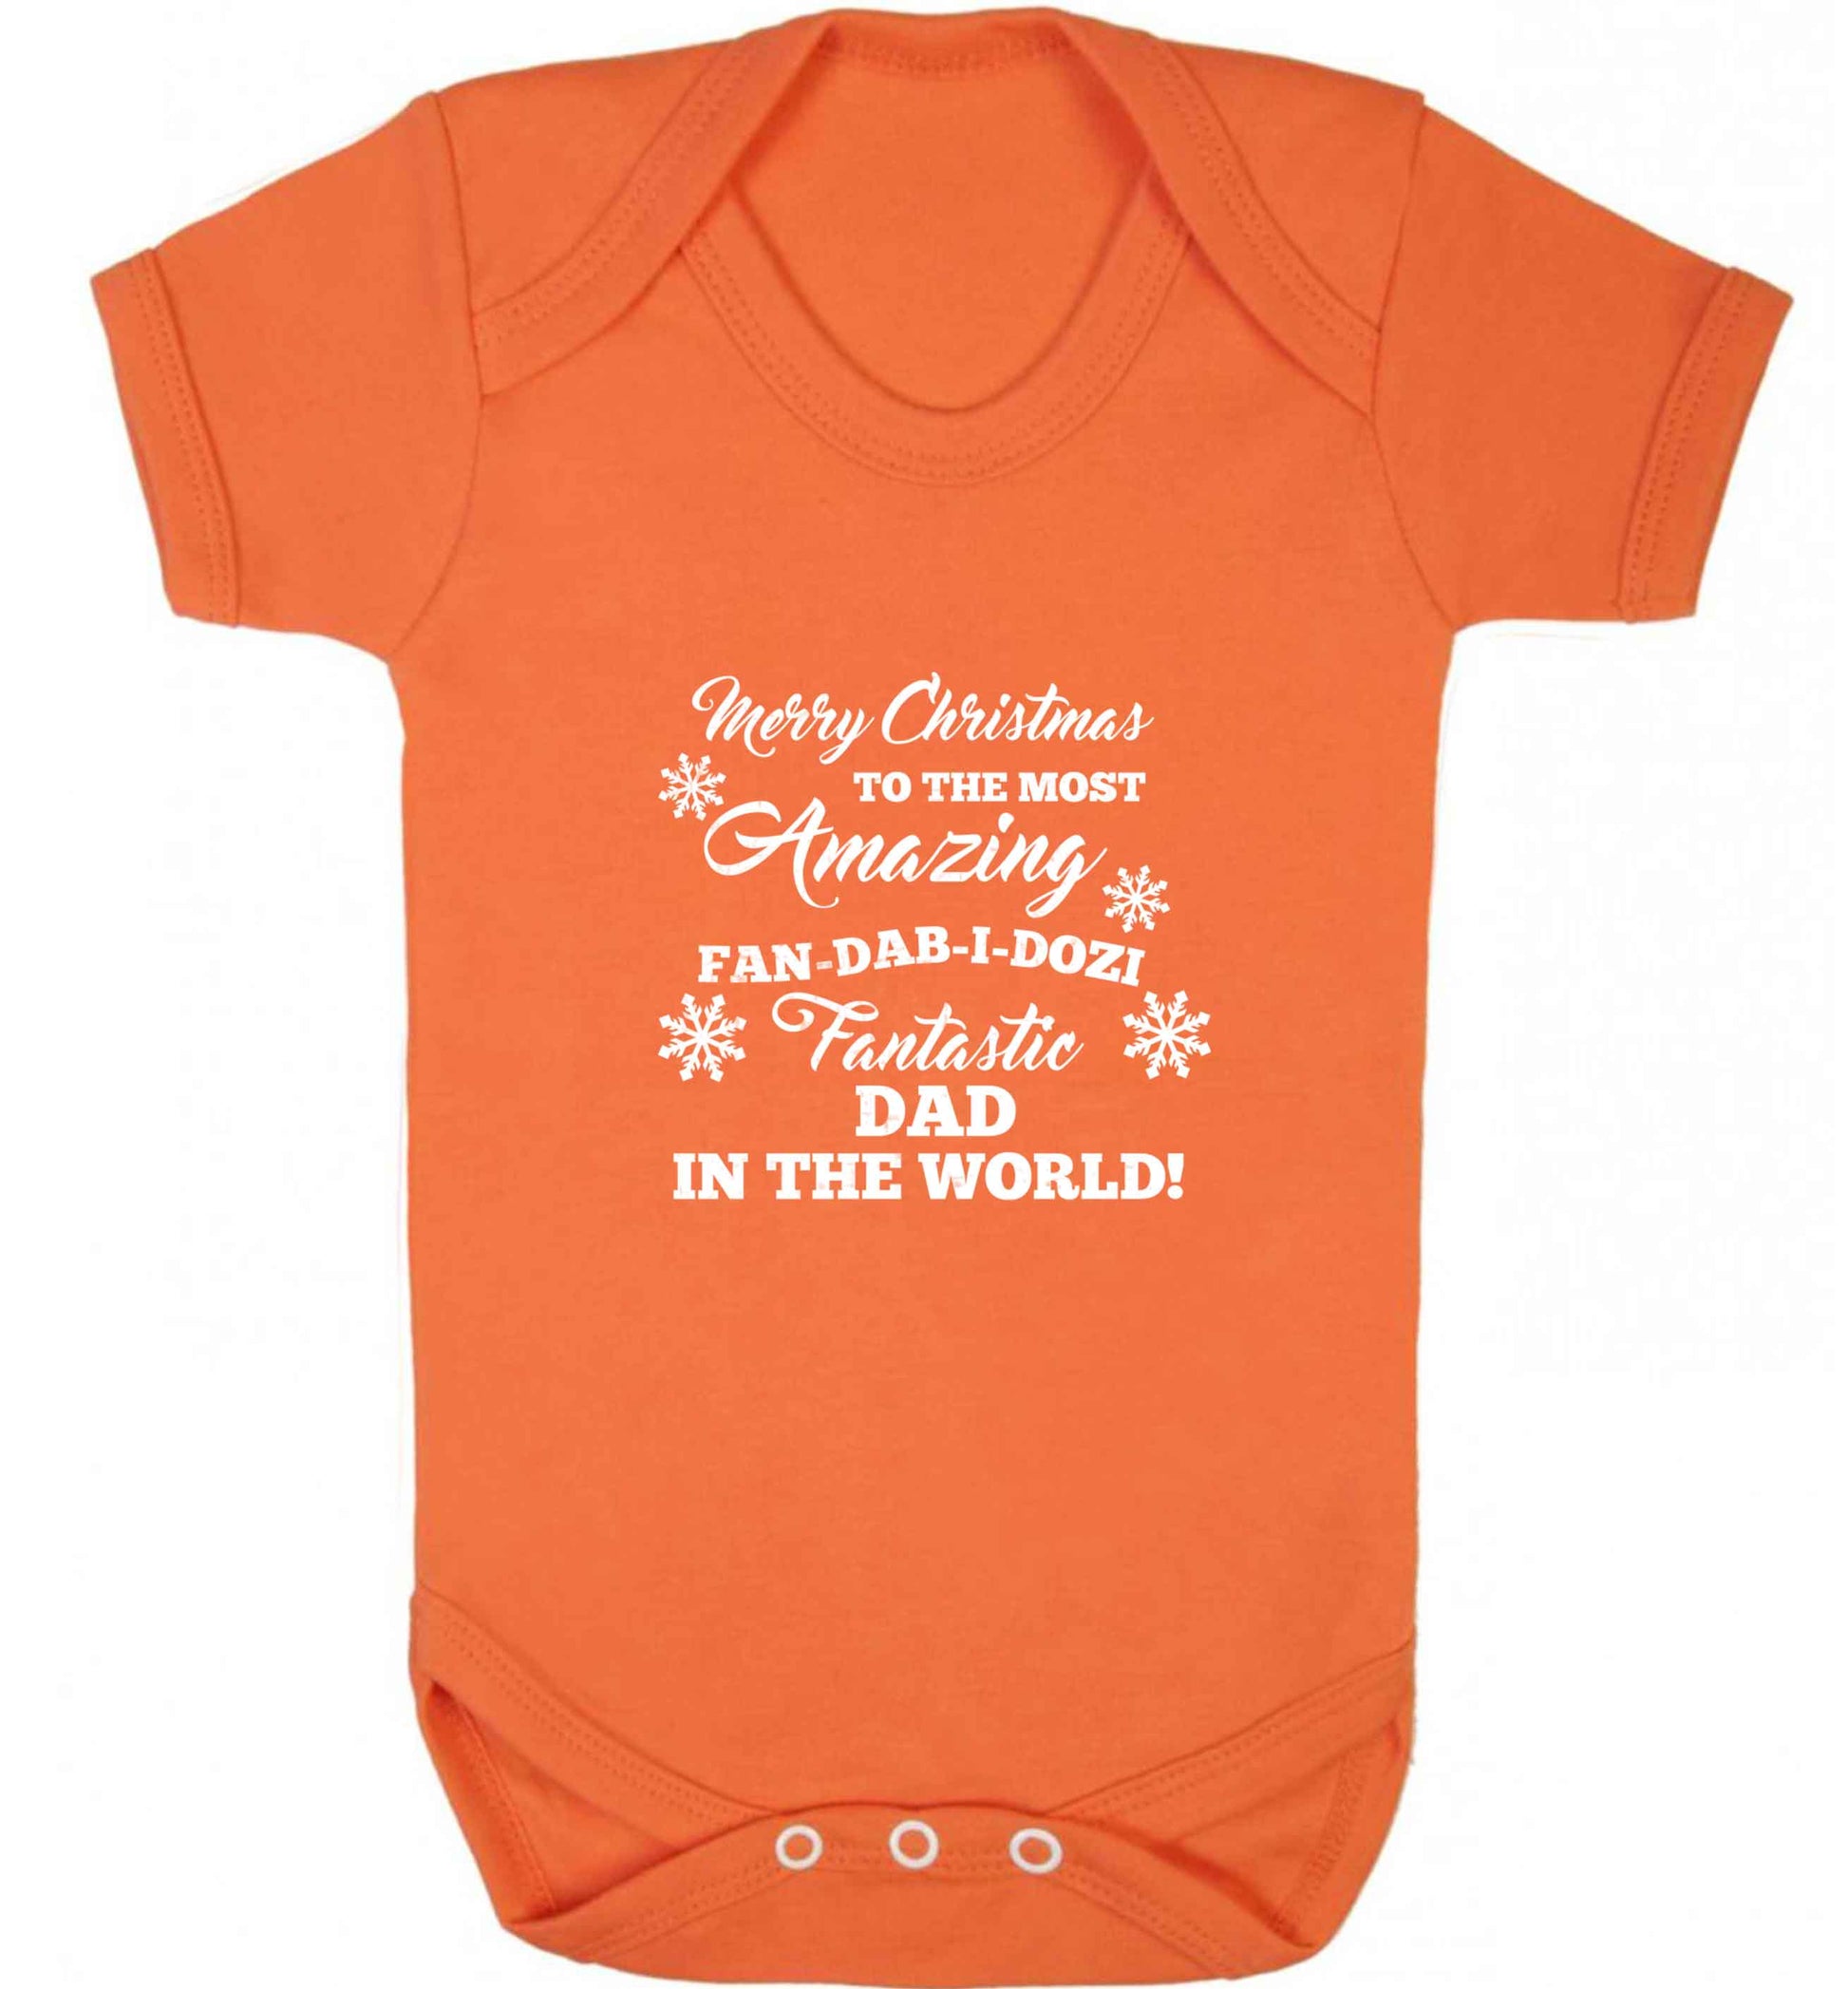 Merry Christmas to the most amazing fan-dab-i-dozi fantasic Dad in the world baby vest orange 18-24 months